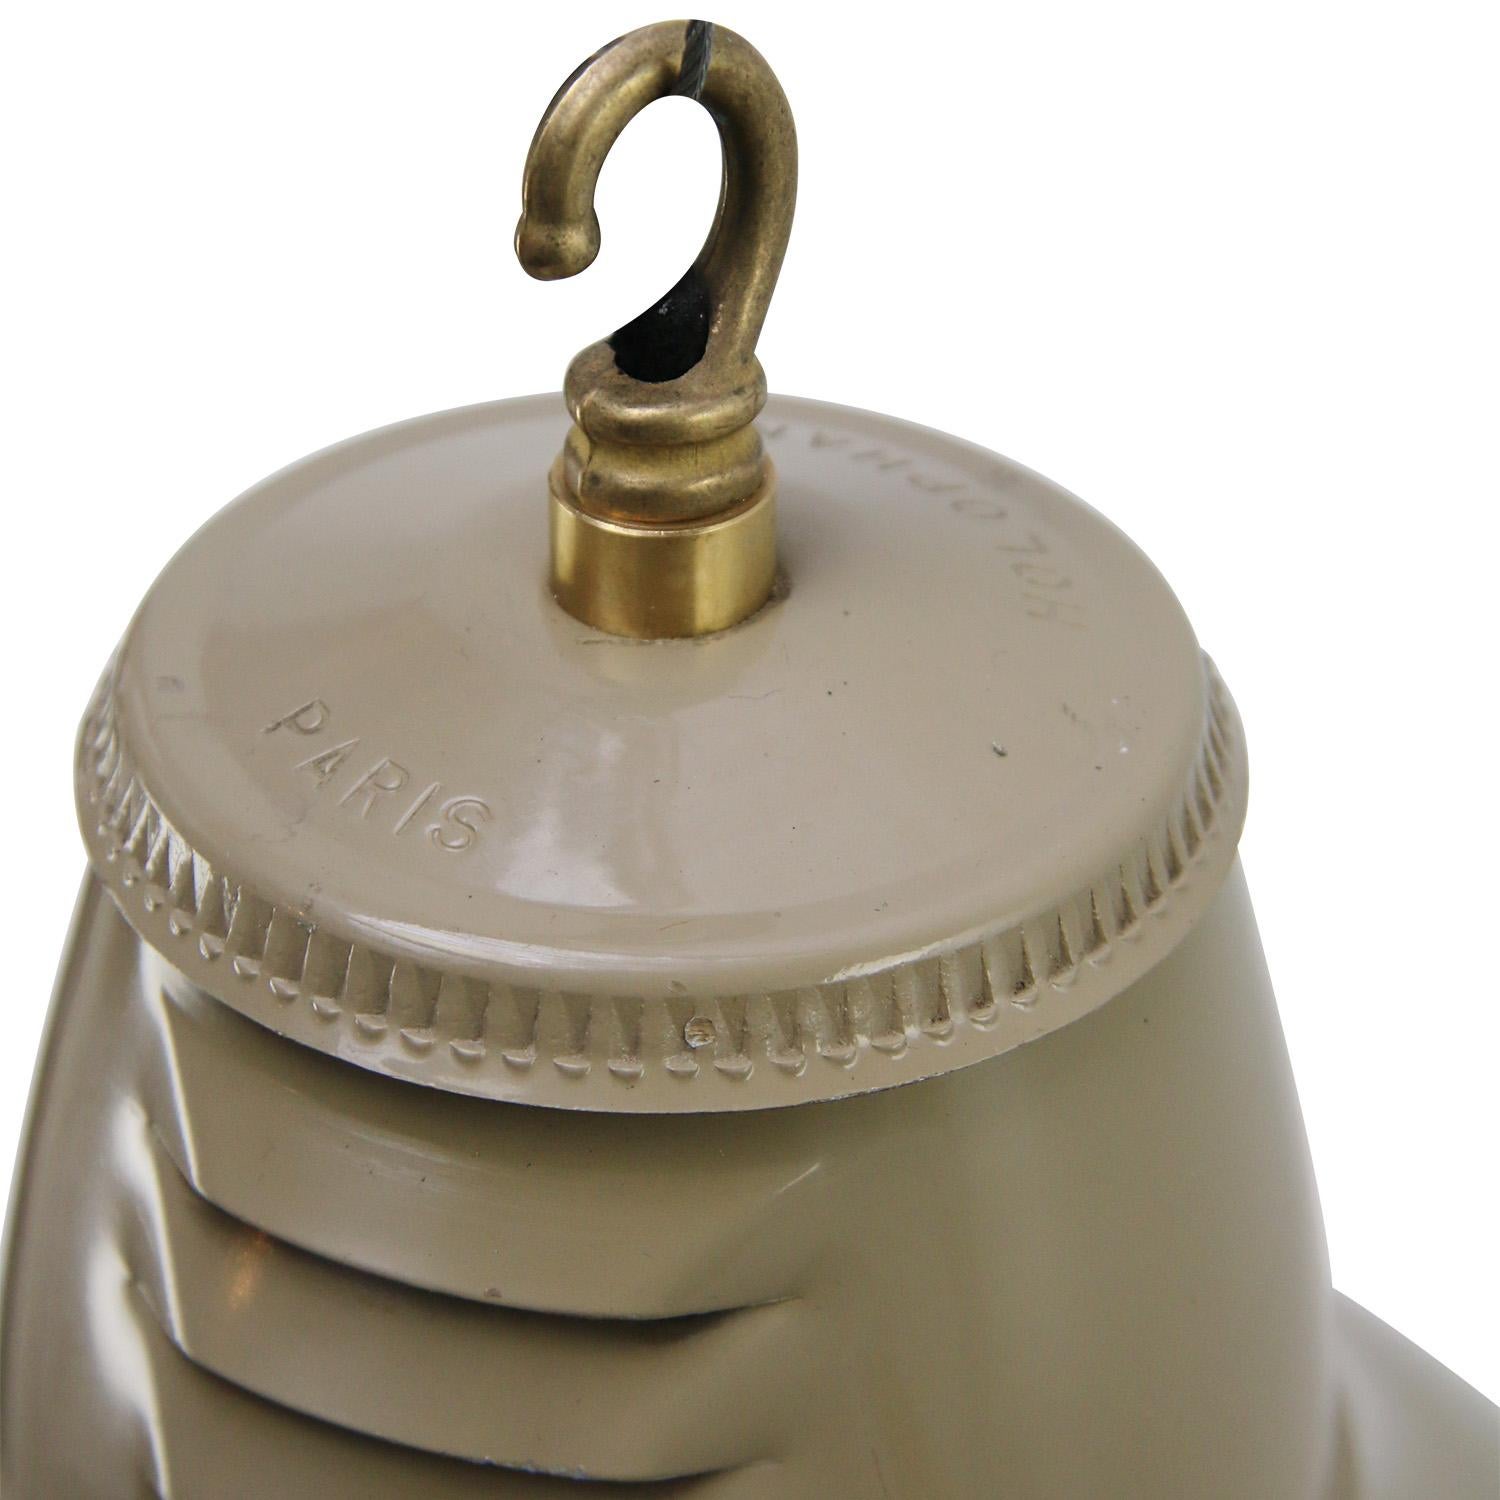 Industrial pendant lamp by Holophane Paris
Beige metal shade with clear striped / holophane glass
Brass top

Weight 2.20 kg / 4.9 lb

Priced per individual item. All lamps have been made suitable by international standards for incandescent